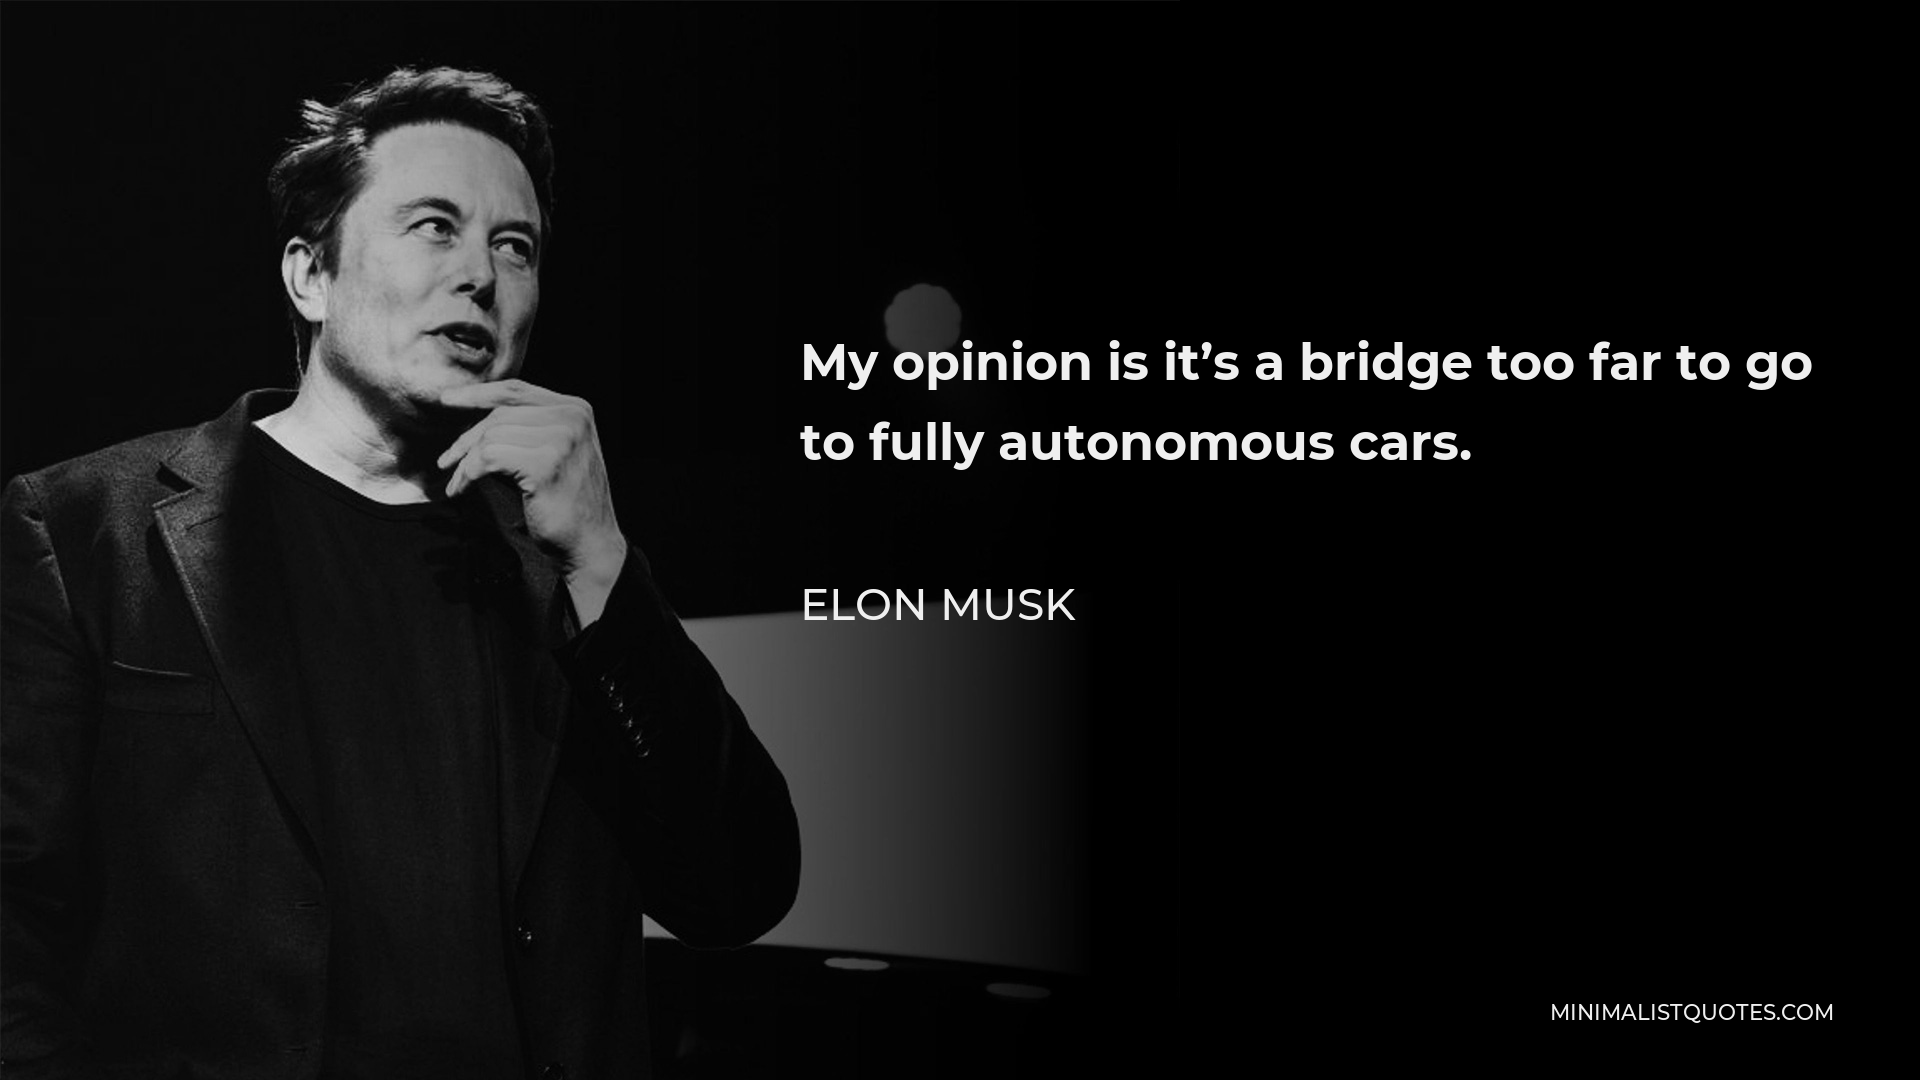 Elon Musk Quote - My opinion is it’s a bridge too far to go to fully autonomous cars.